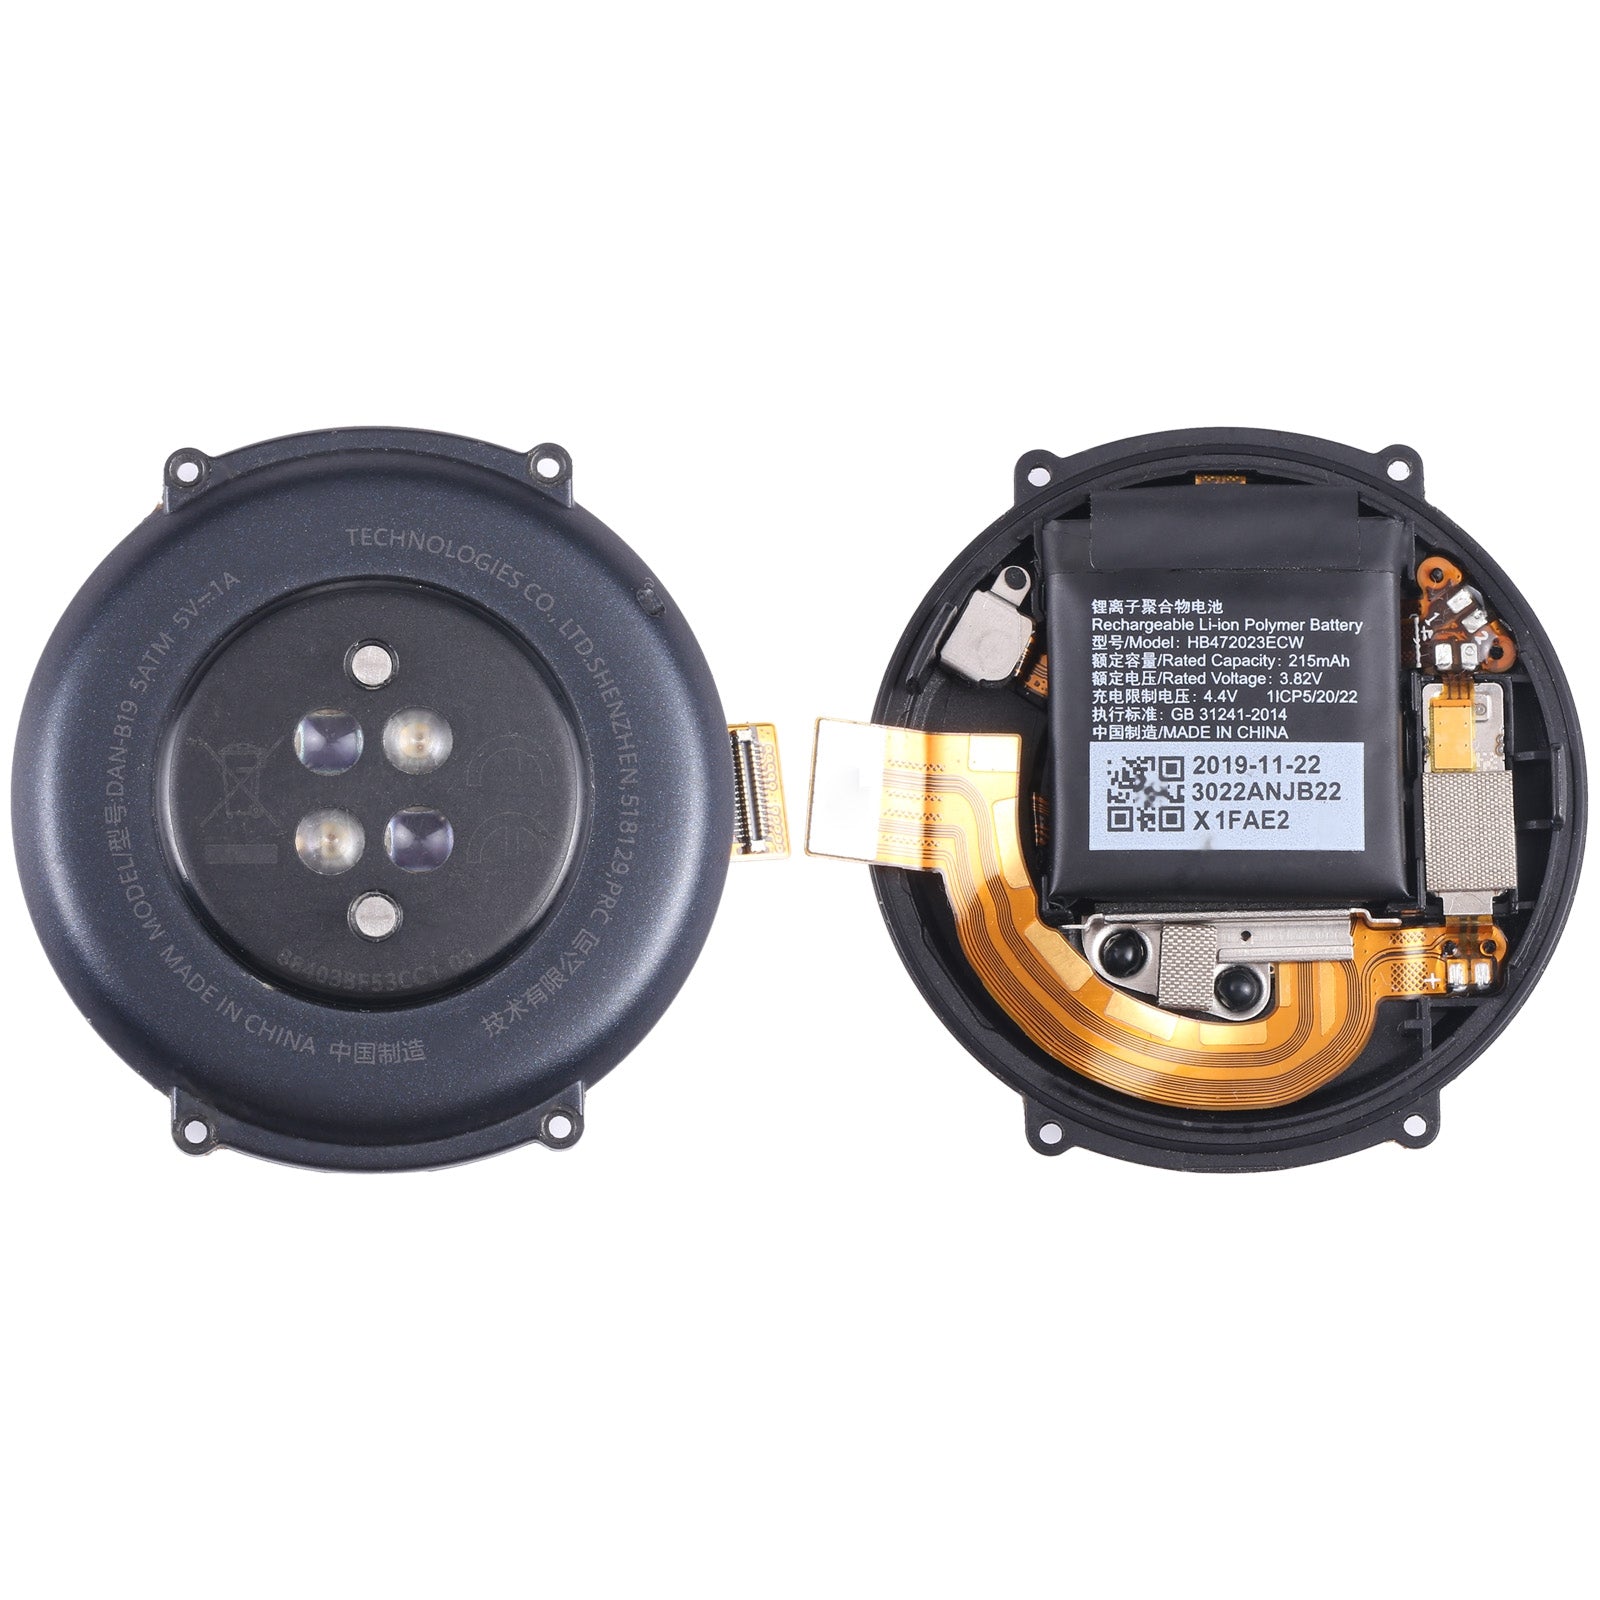 Full Back Cover + Battery Huawei Watch GT 2 42 mm